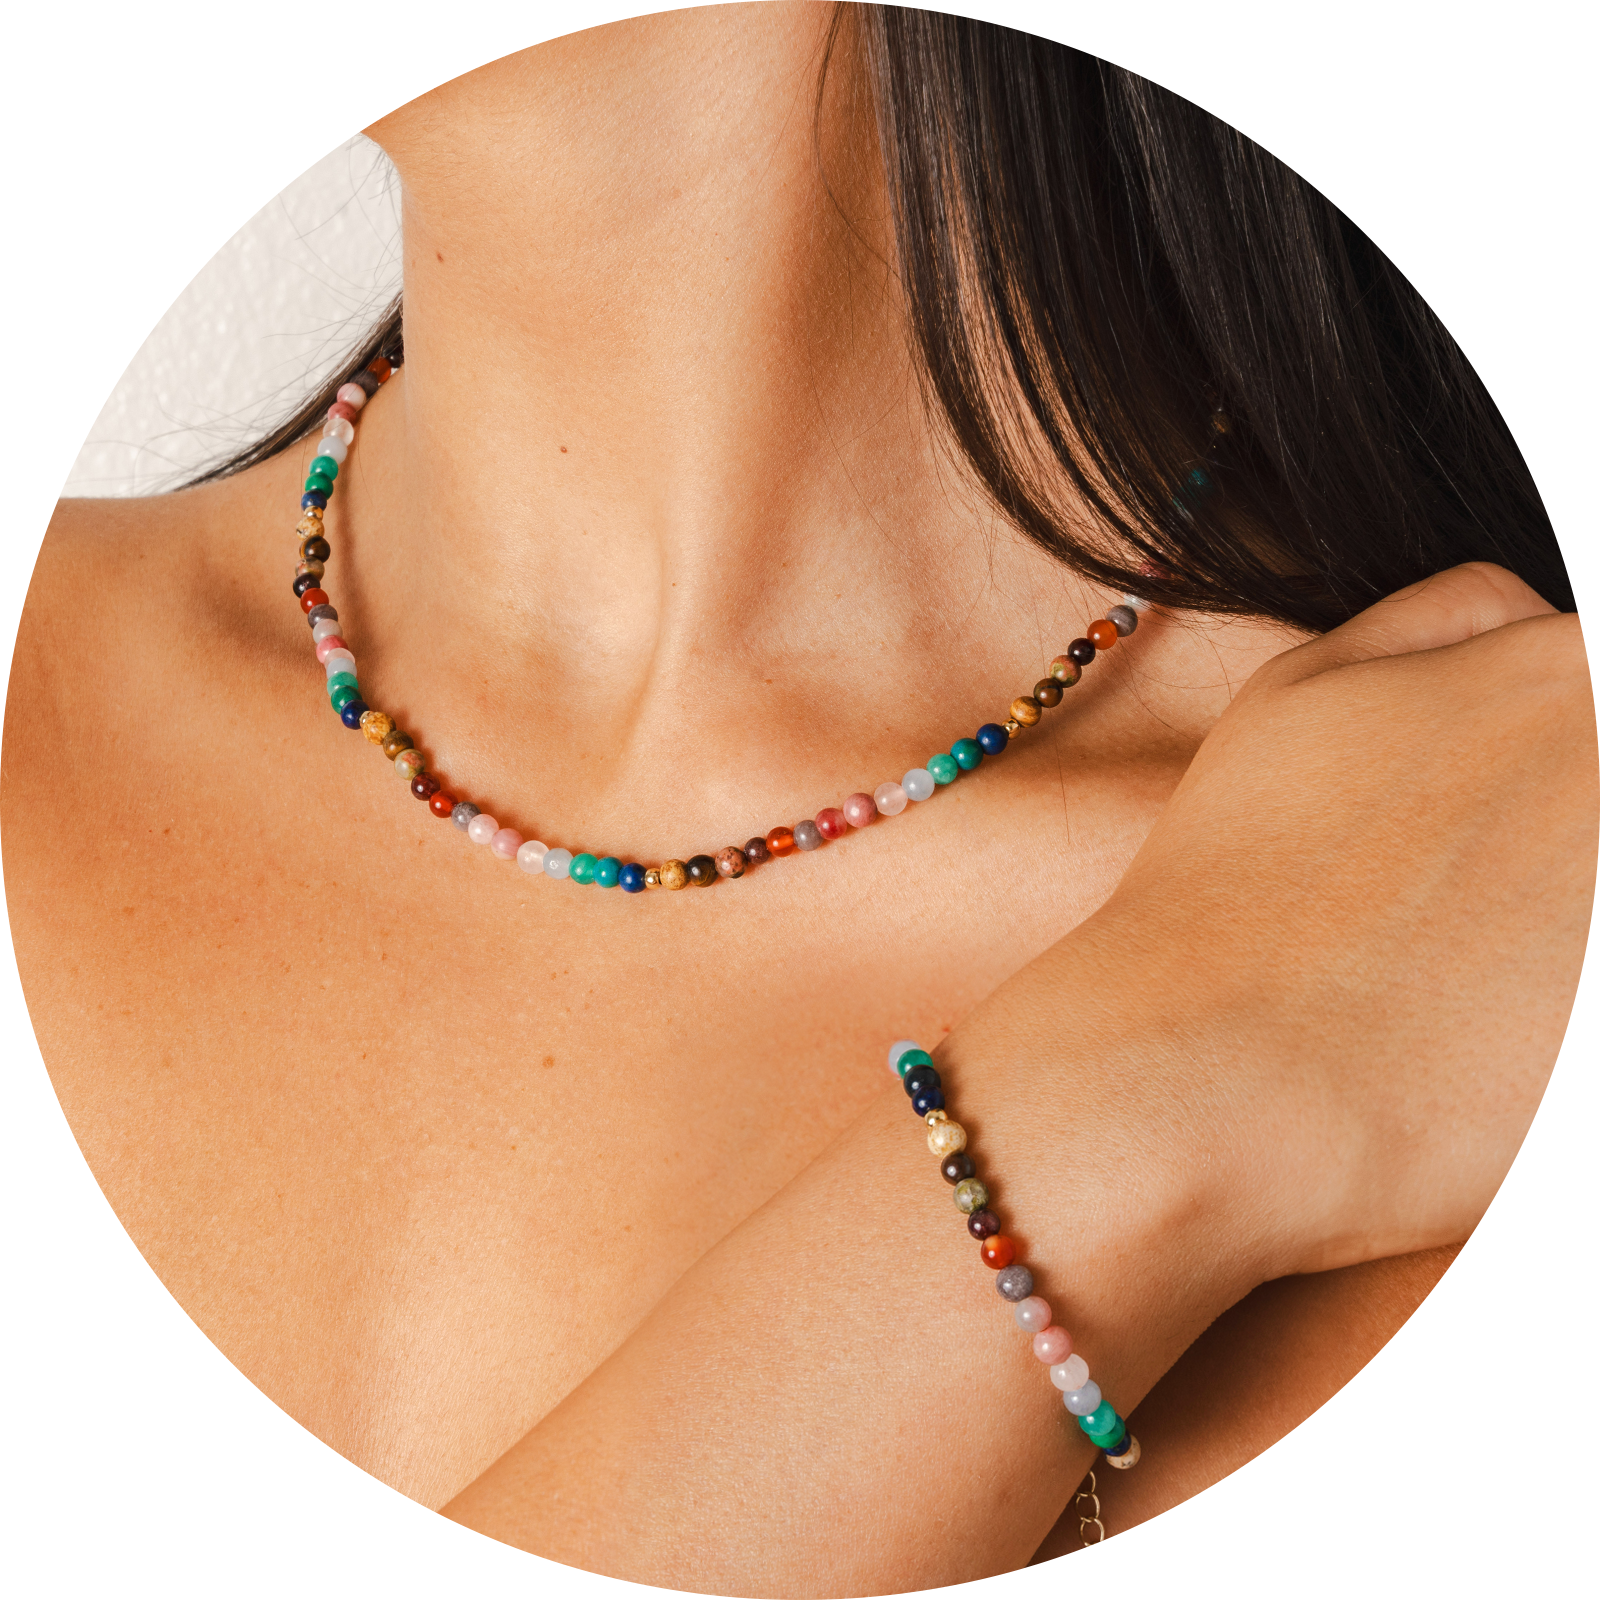 Model wearing a healing necklace and bracelet set. The set includes a 4mm multicolor stone healing bracelet and a 4mm multicolor stone healing necklace.